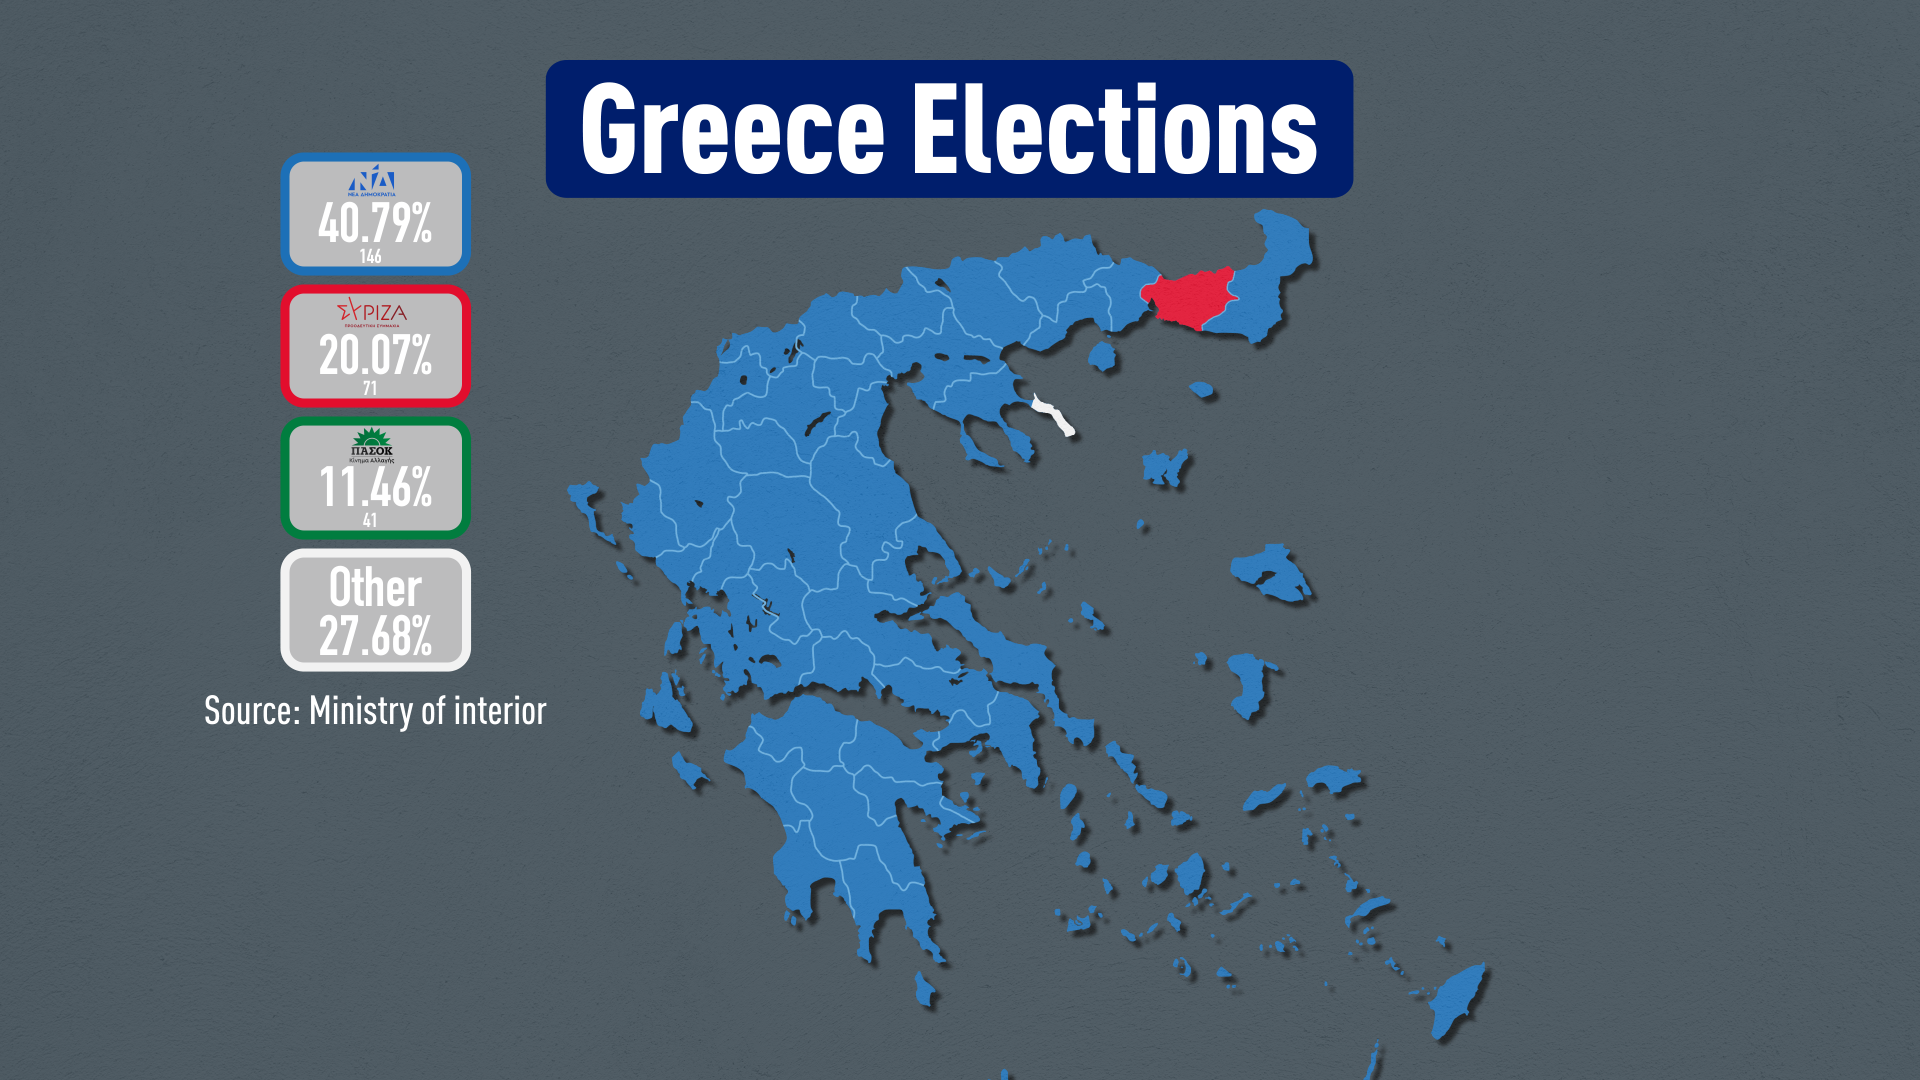 Mitsotakis's New Democracy party won 146 seats, five seats short of the 151 required for a majority. An interior ministry vote map showed all but one of Greece's electoral districts coloured in New Democracy blue. /CGTN